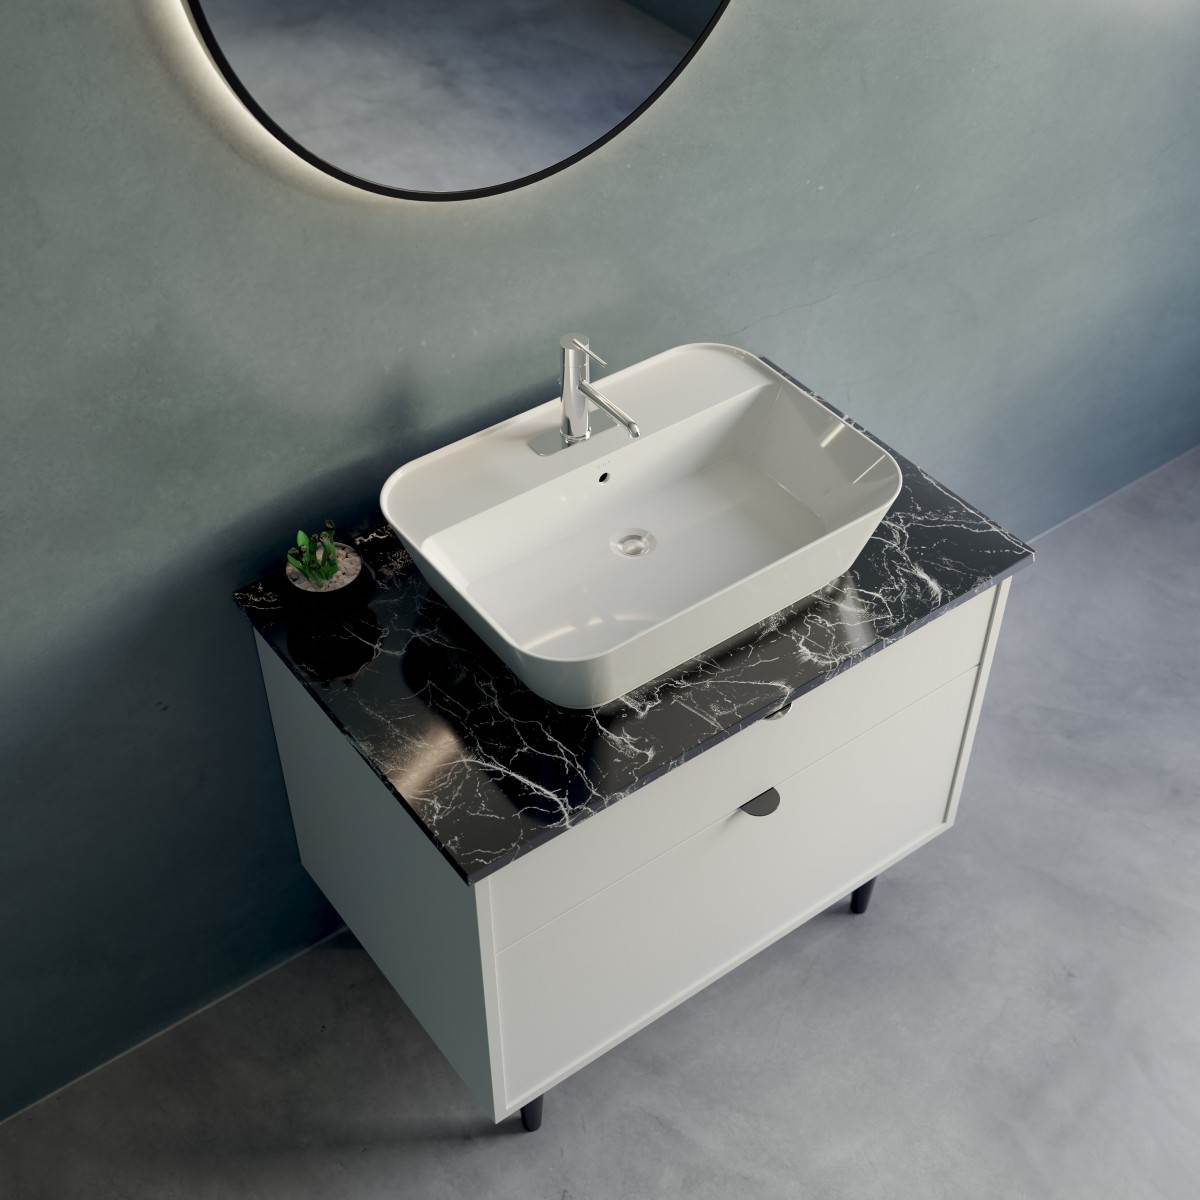 ELEMENT 2 Vessel Sink-related